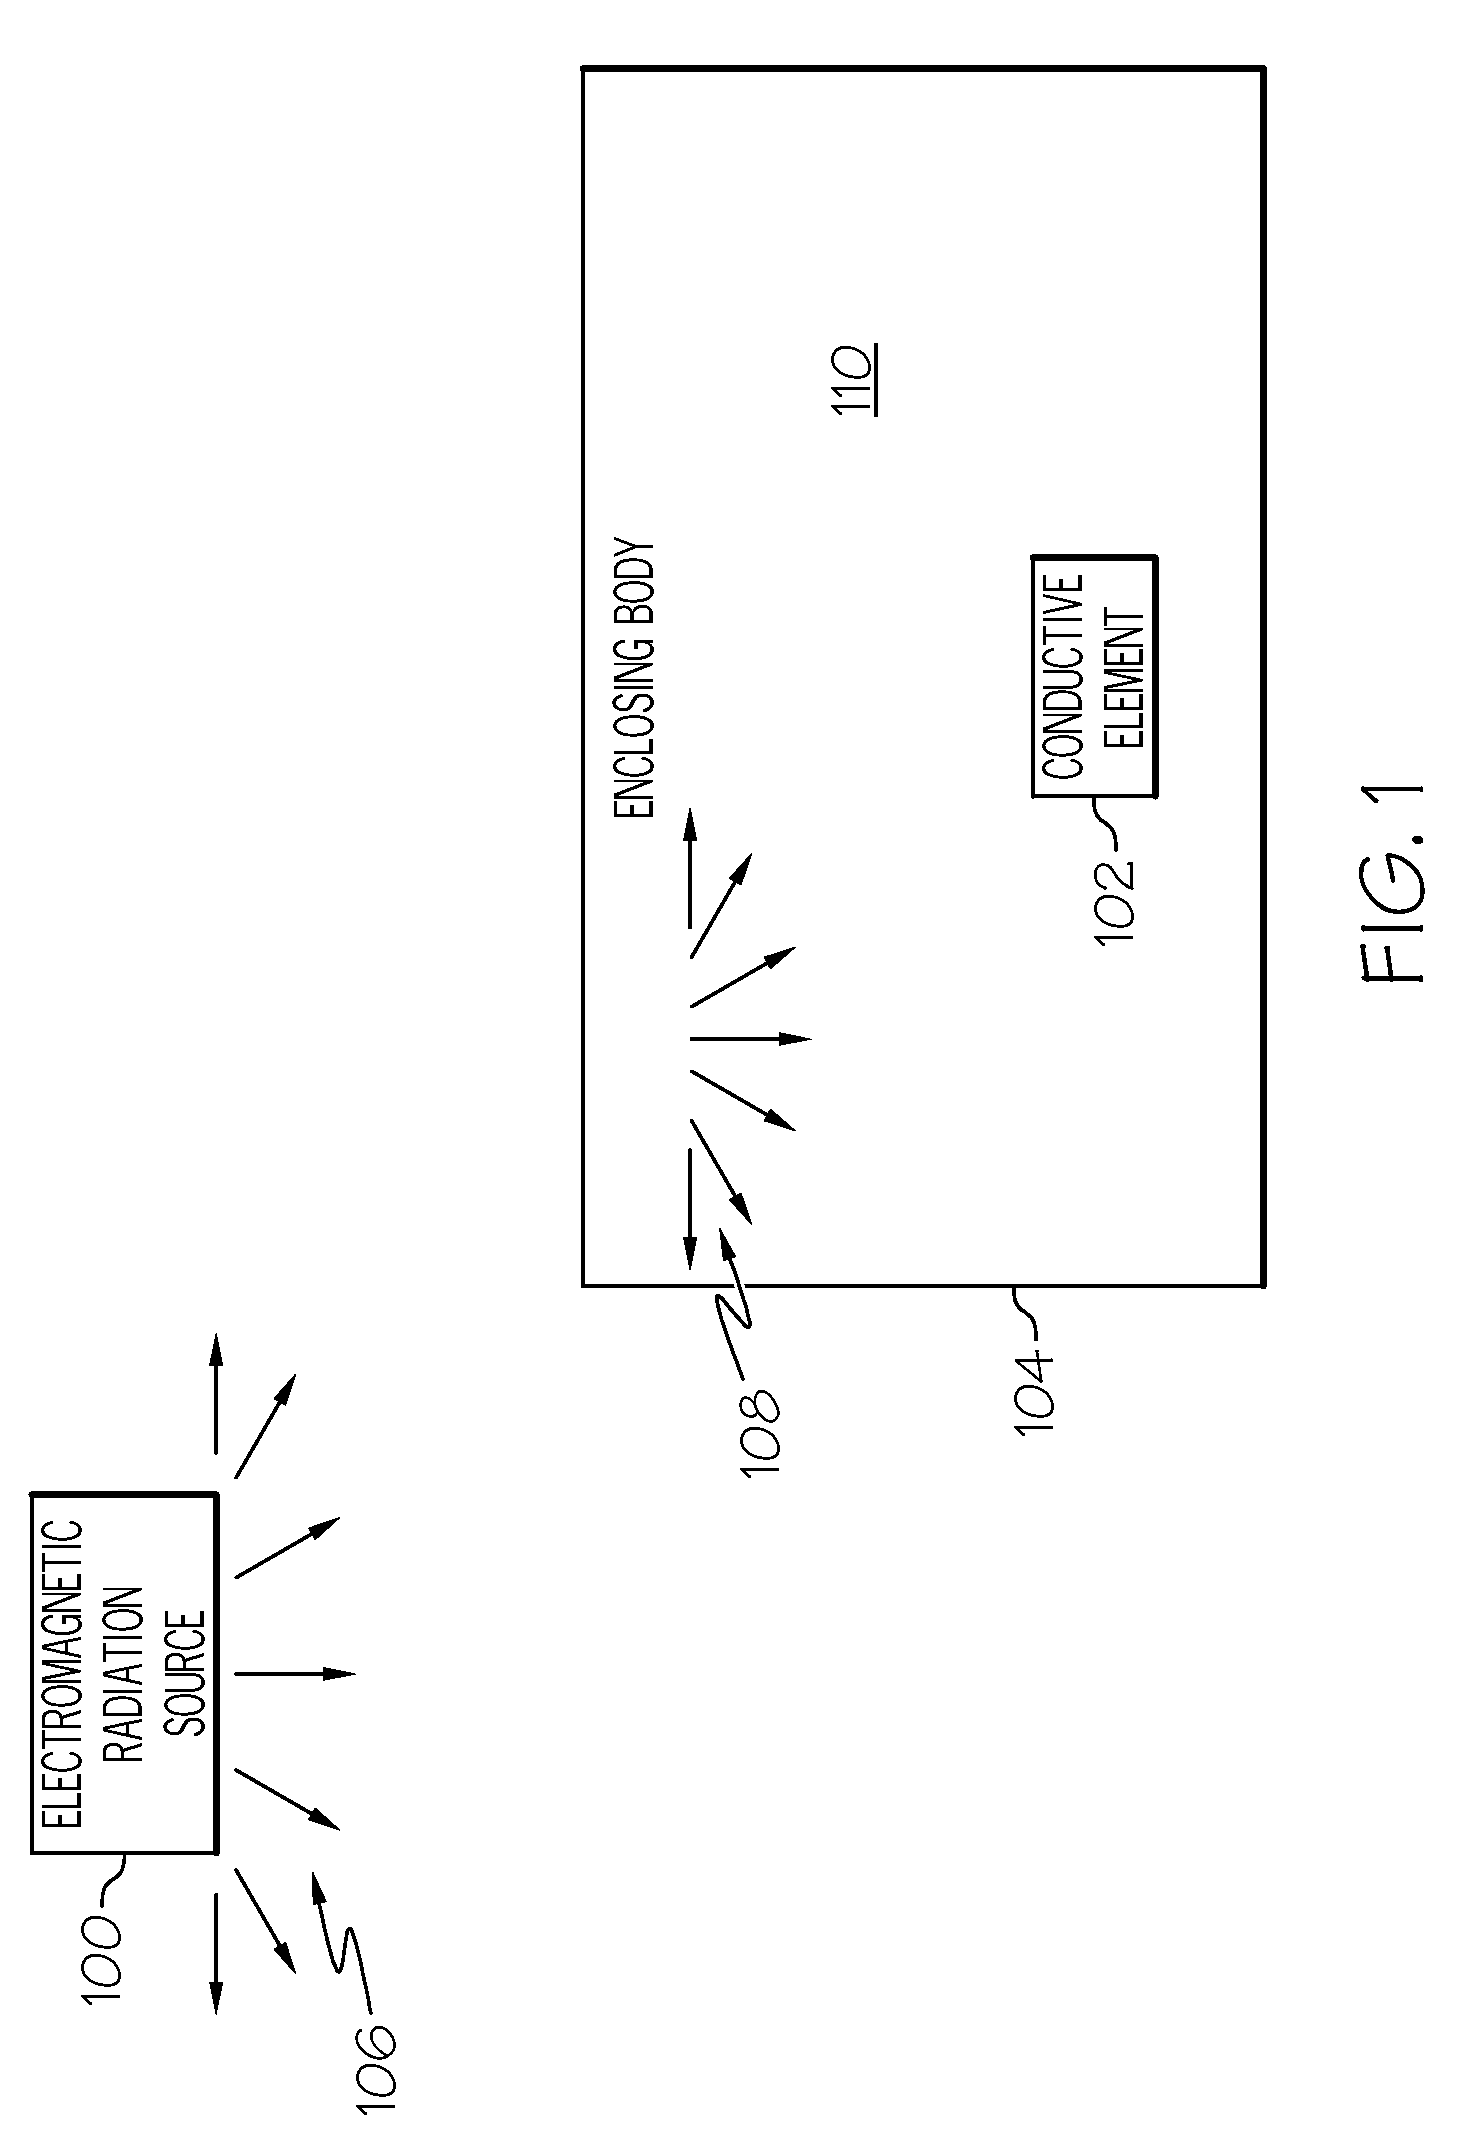 Induced field determination using diffuse field reciprocity